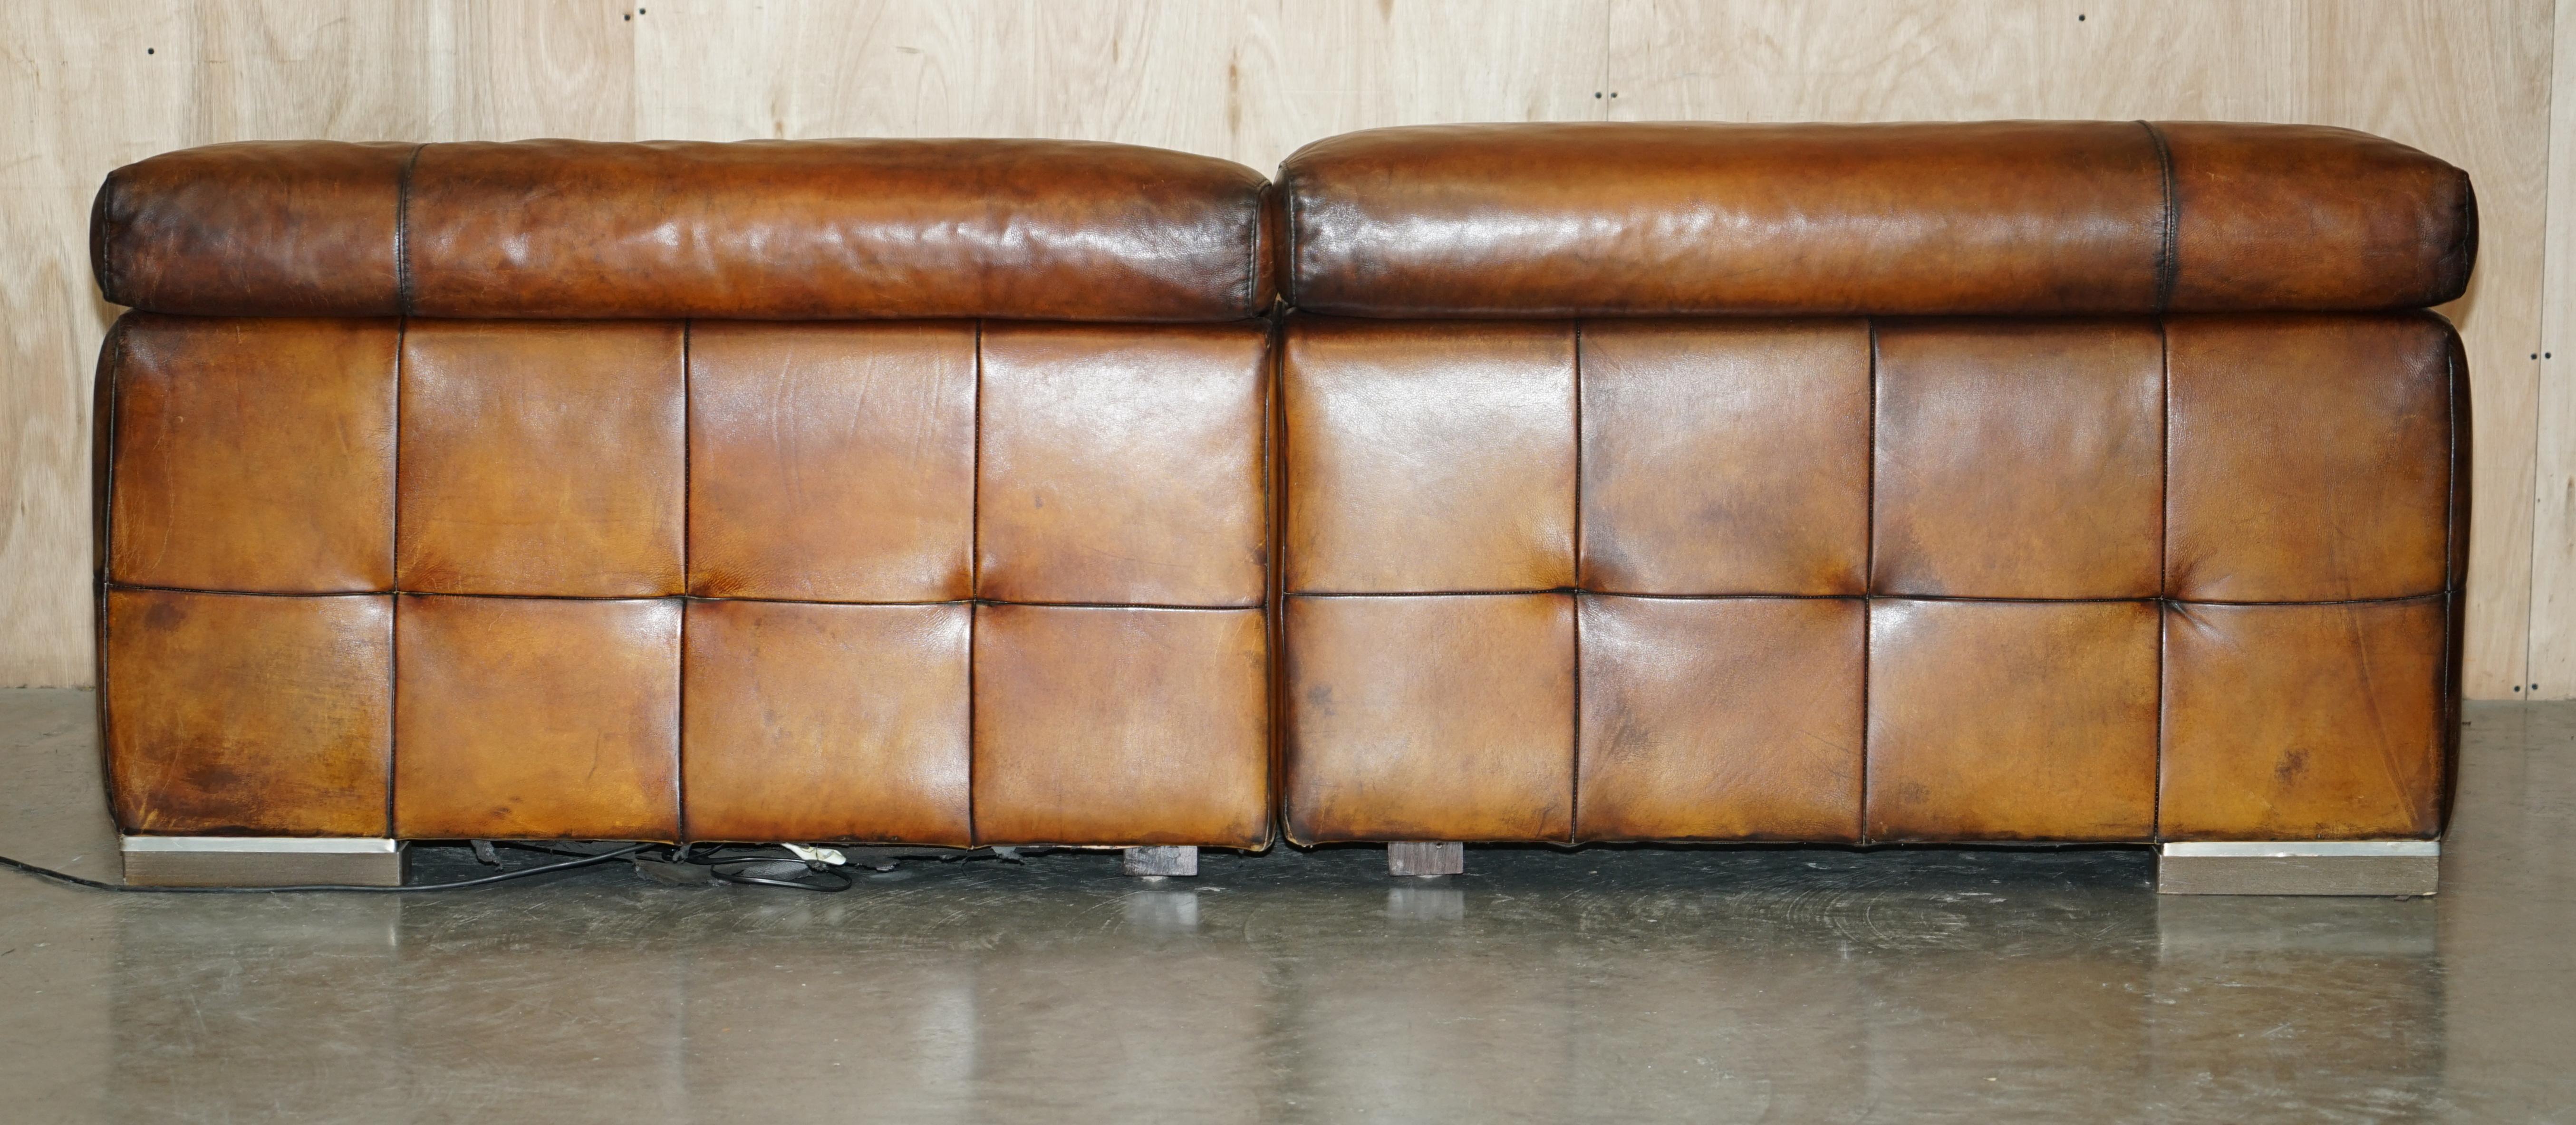 Natuzzi Roma Cigar Brown Leather Sofa Electric Raising Headrest Part of a Suite For Sale 5